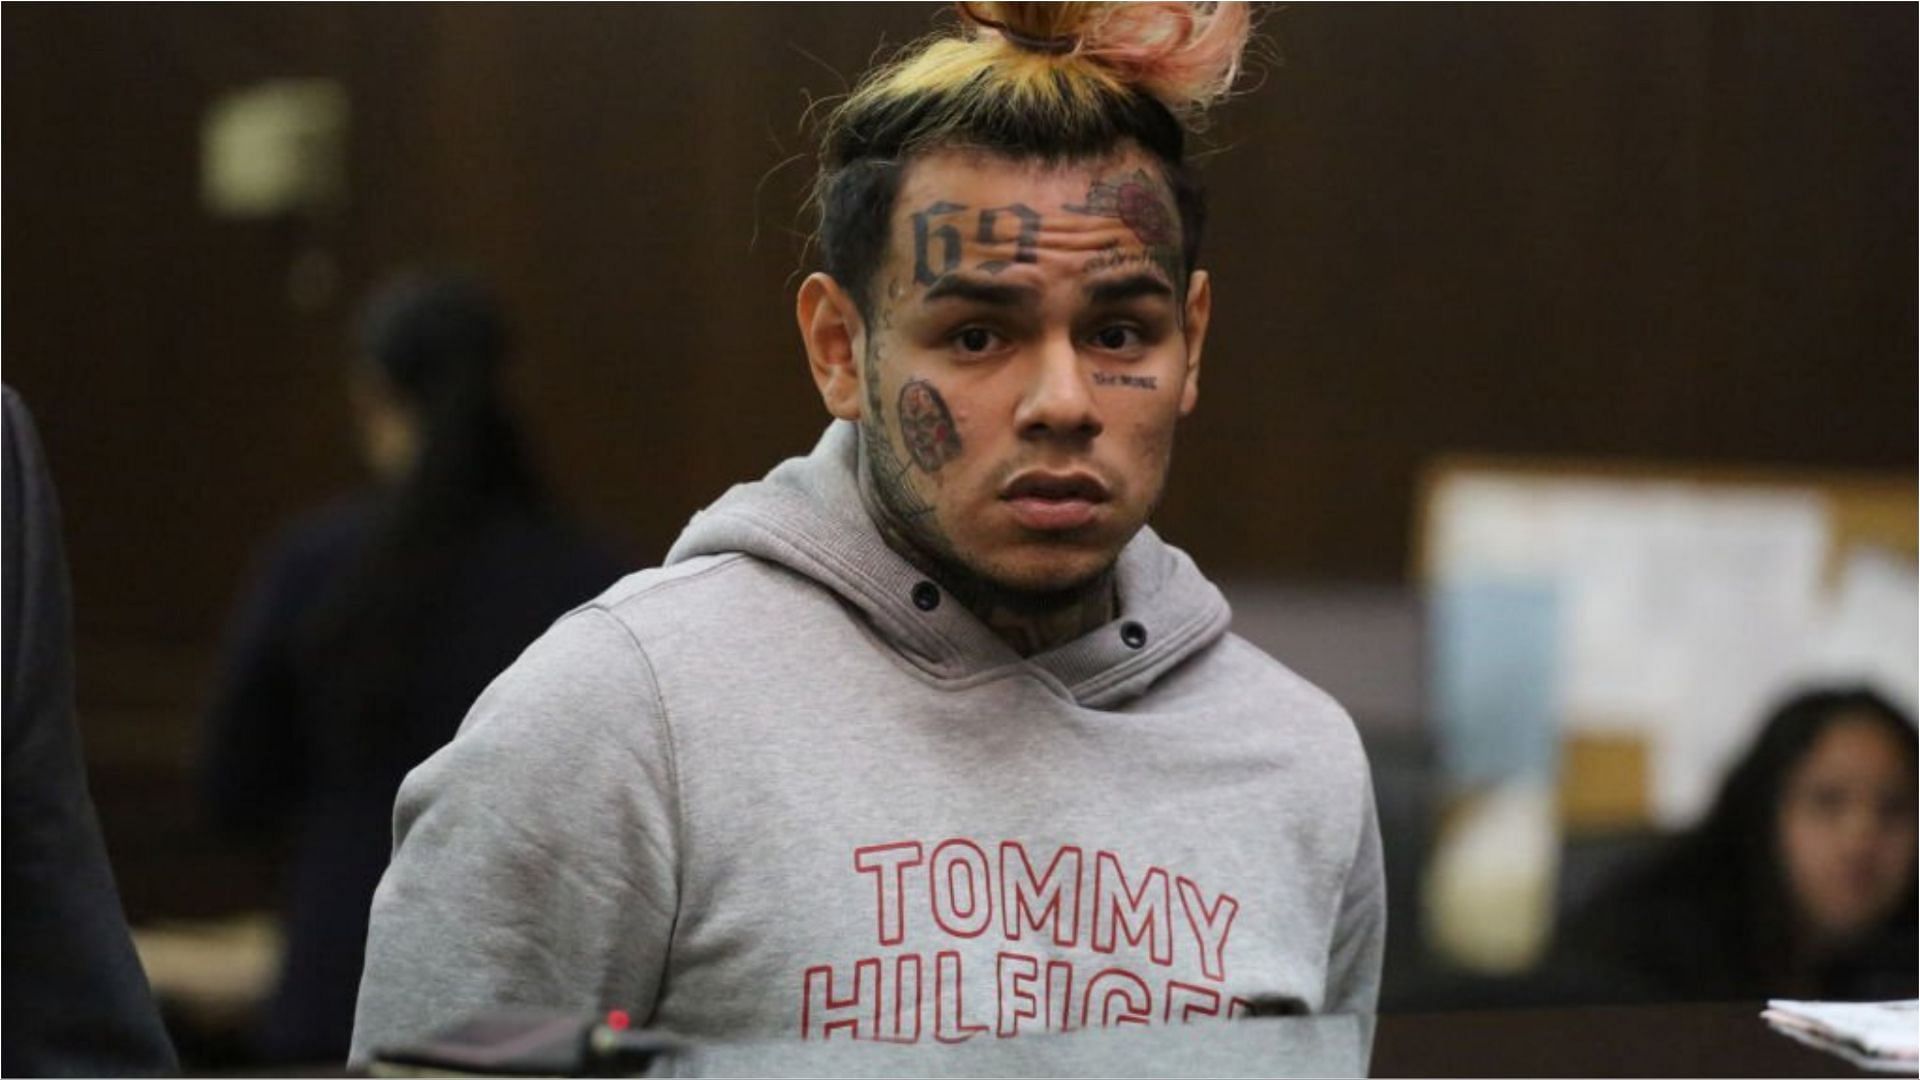 6ix9ine was hospitalized after being attacked (Image via Jefferson Siegel/Getty Images)